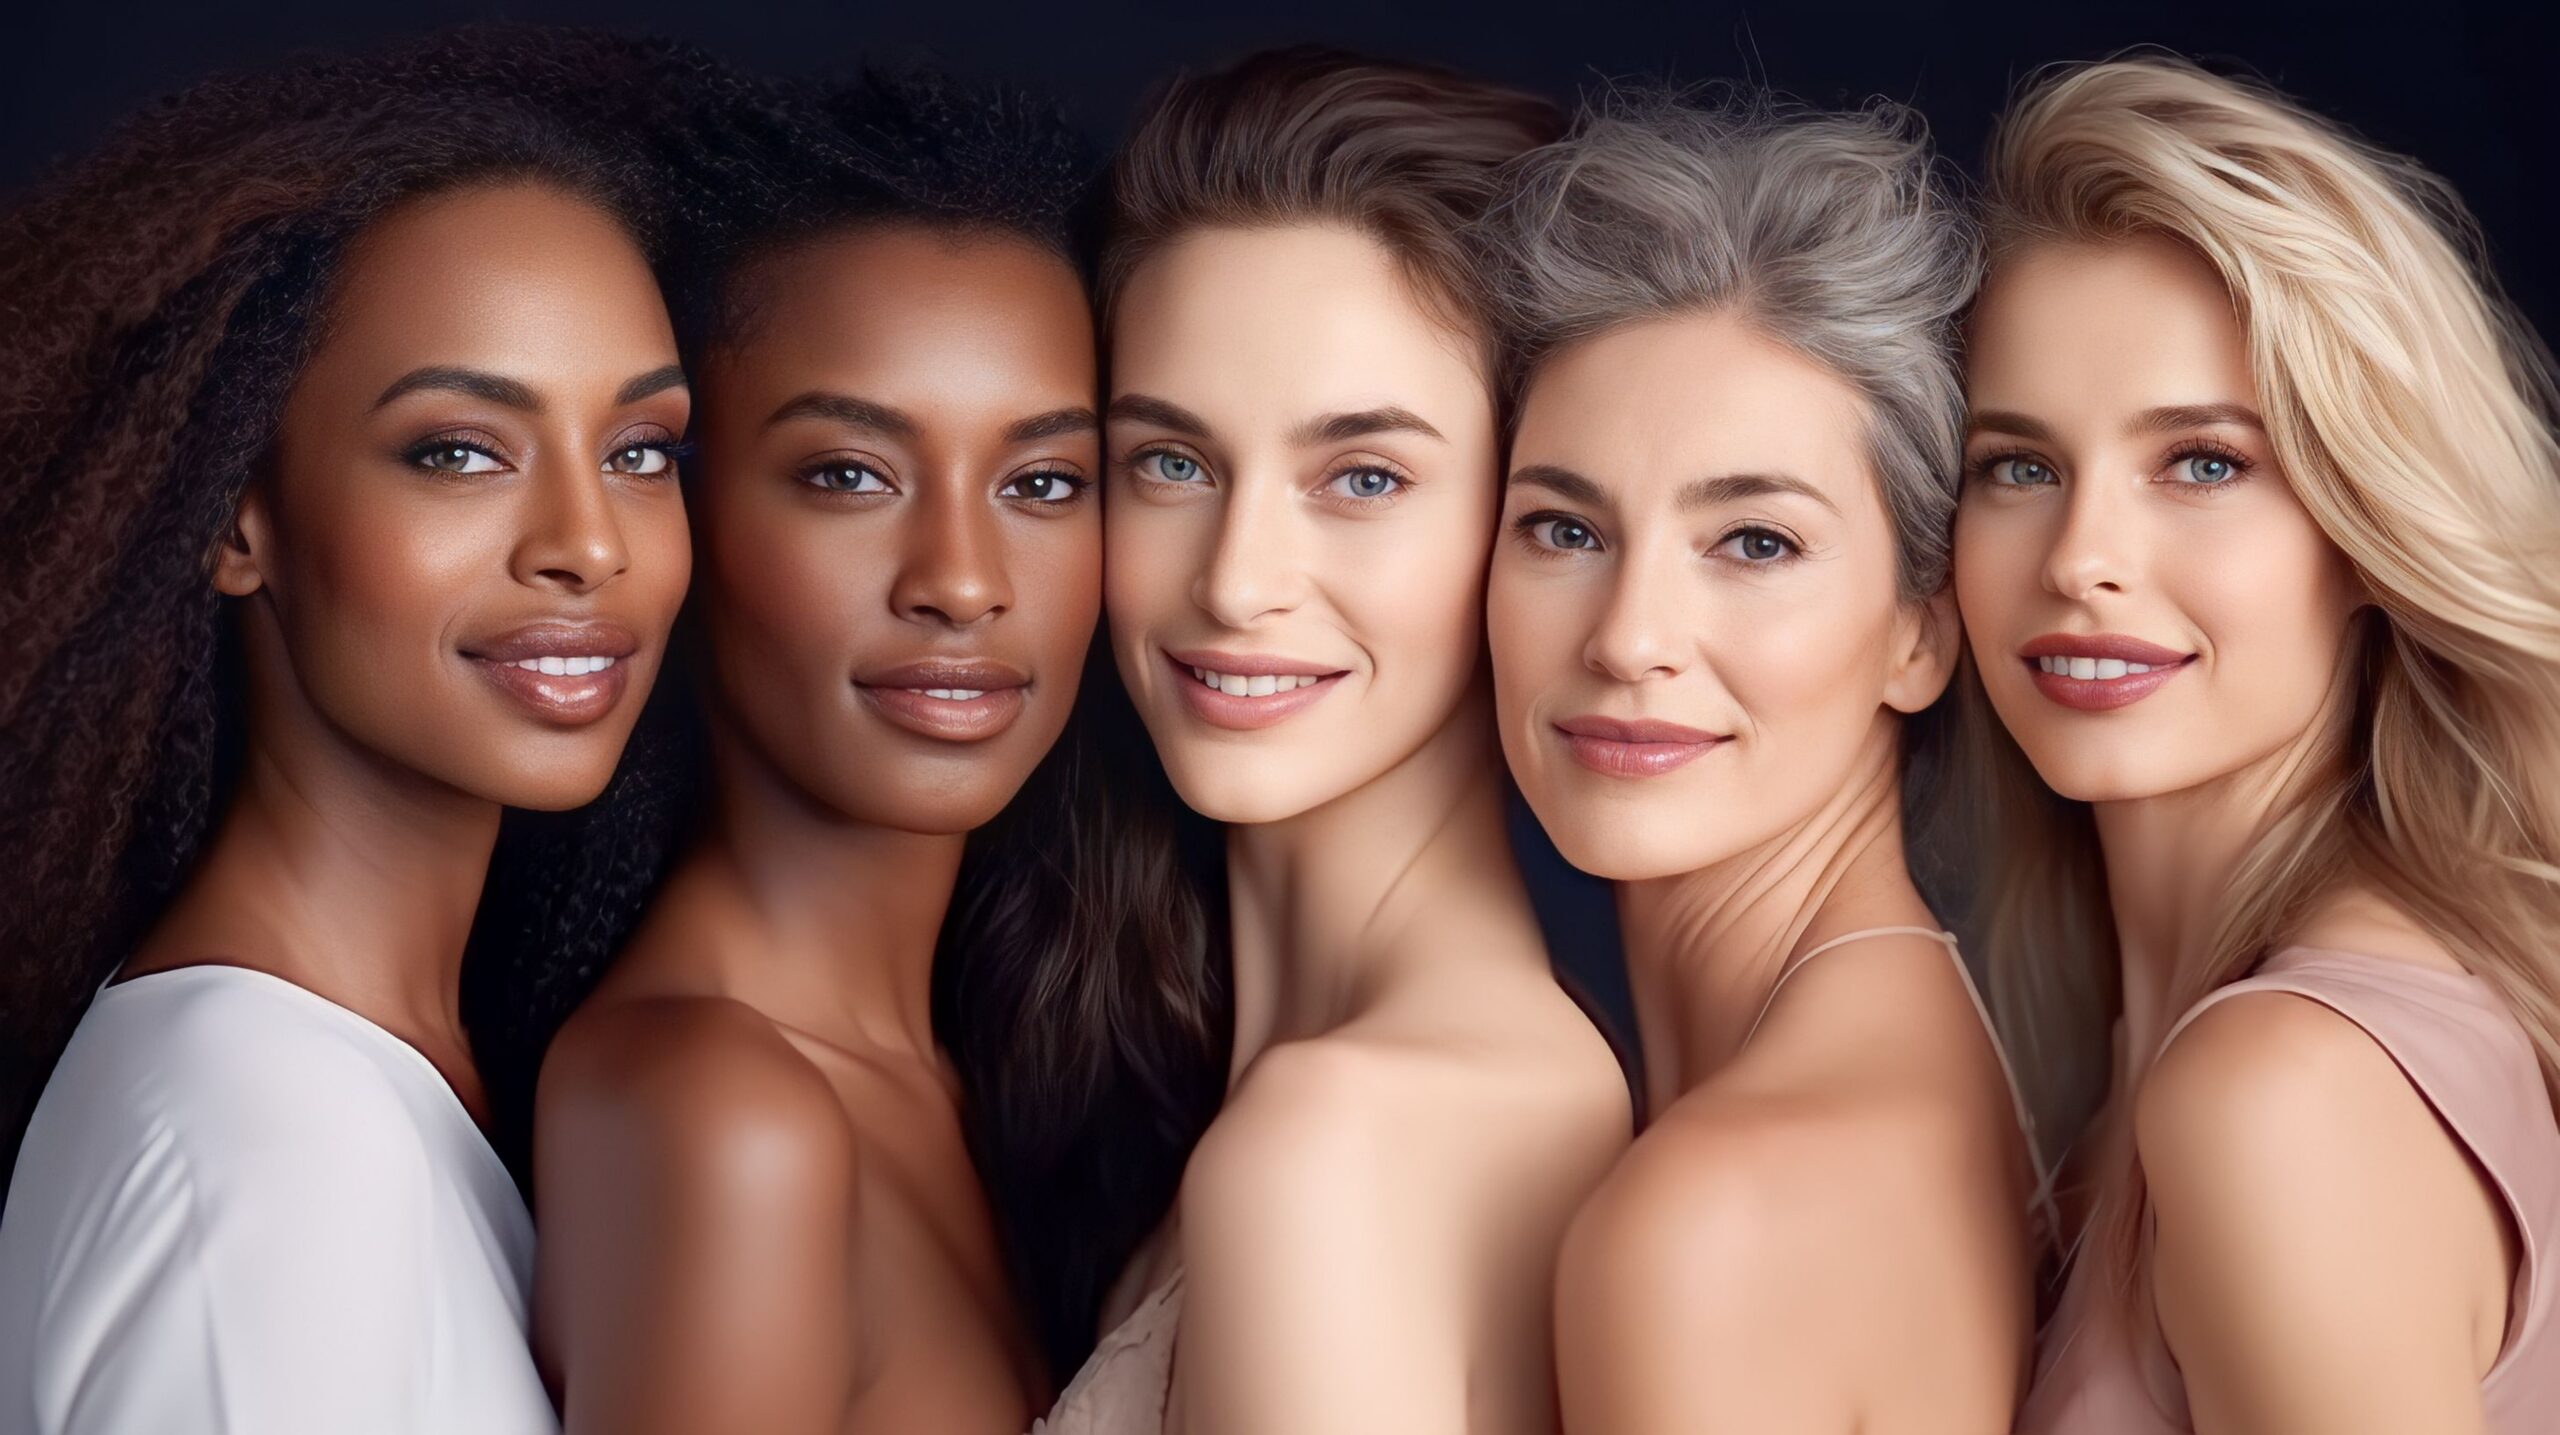 A group of women with different skin tones and hair colors.